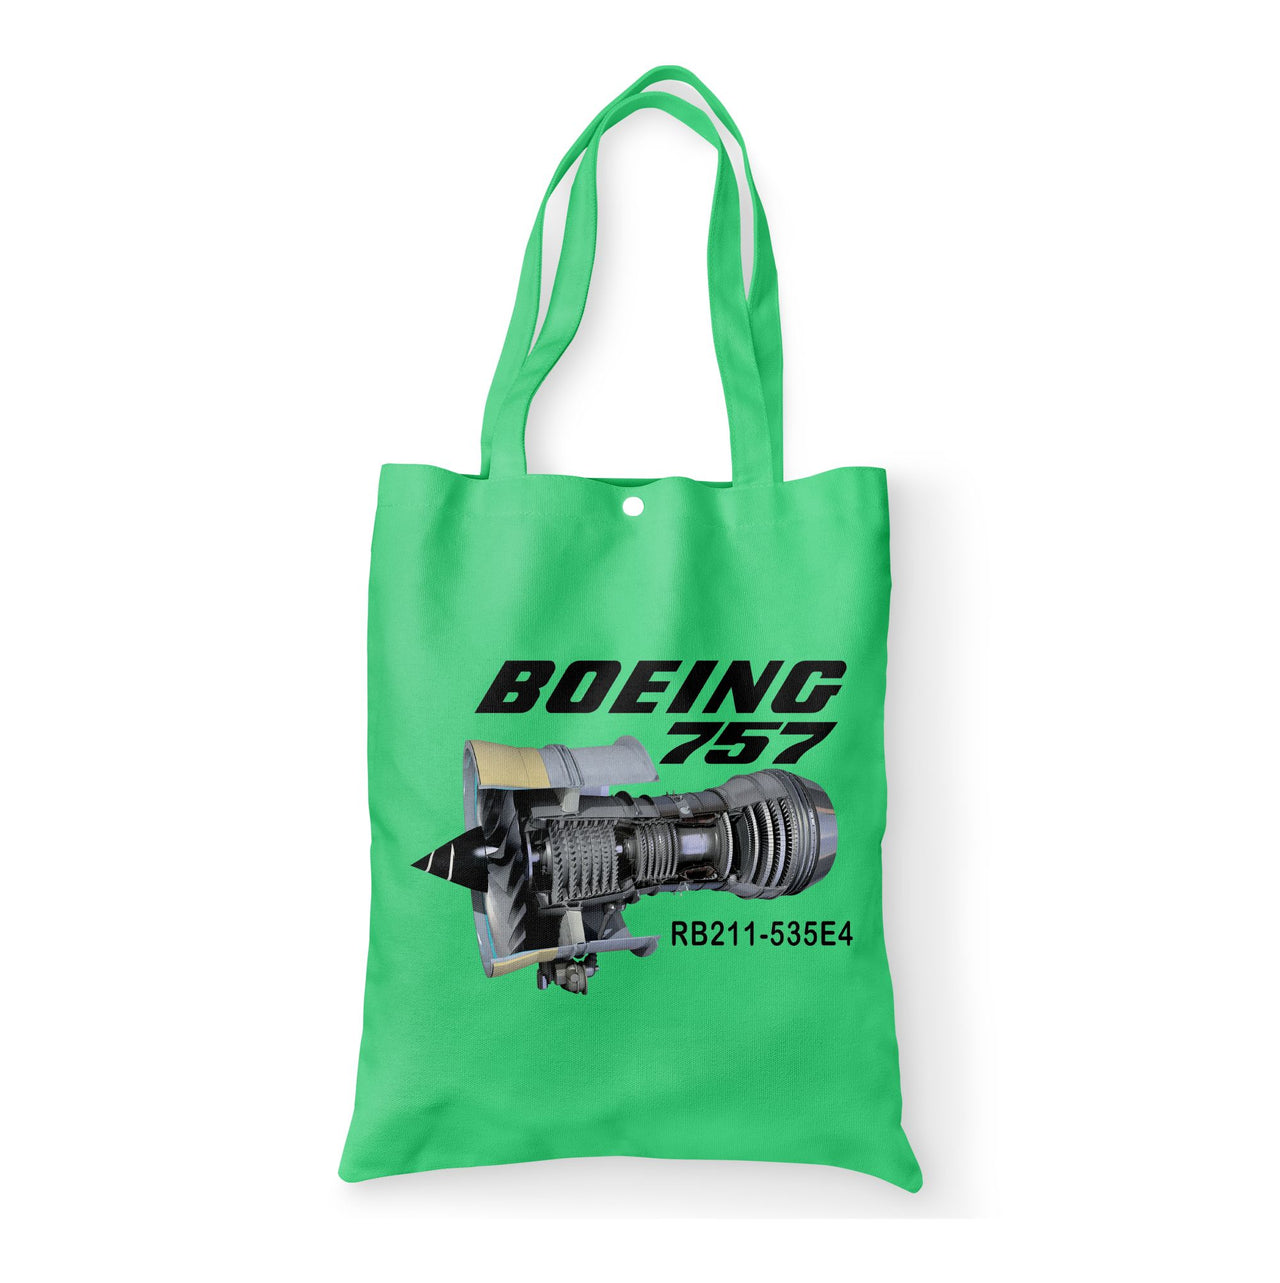 Boeing 757 & Rolls Royce Engine (RB211) Designed Tote Bags